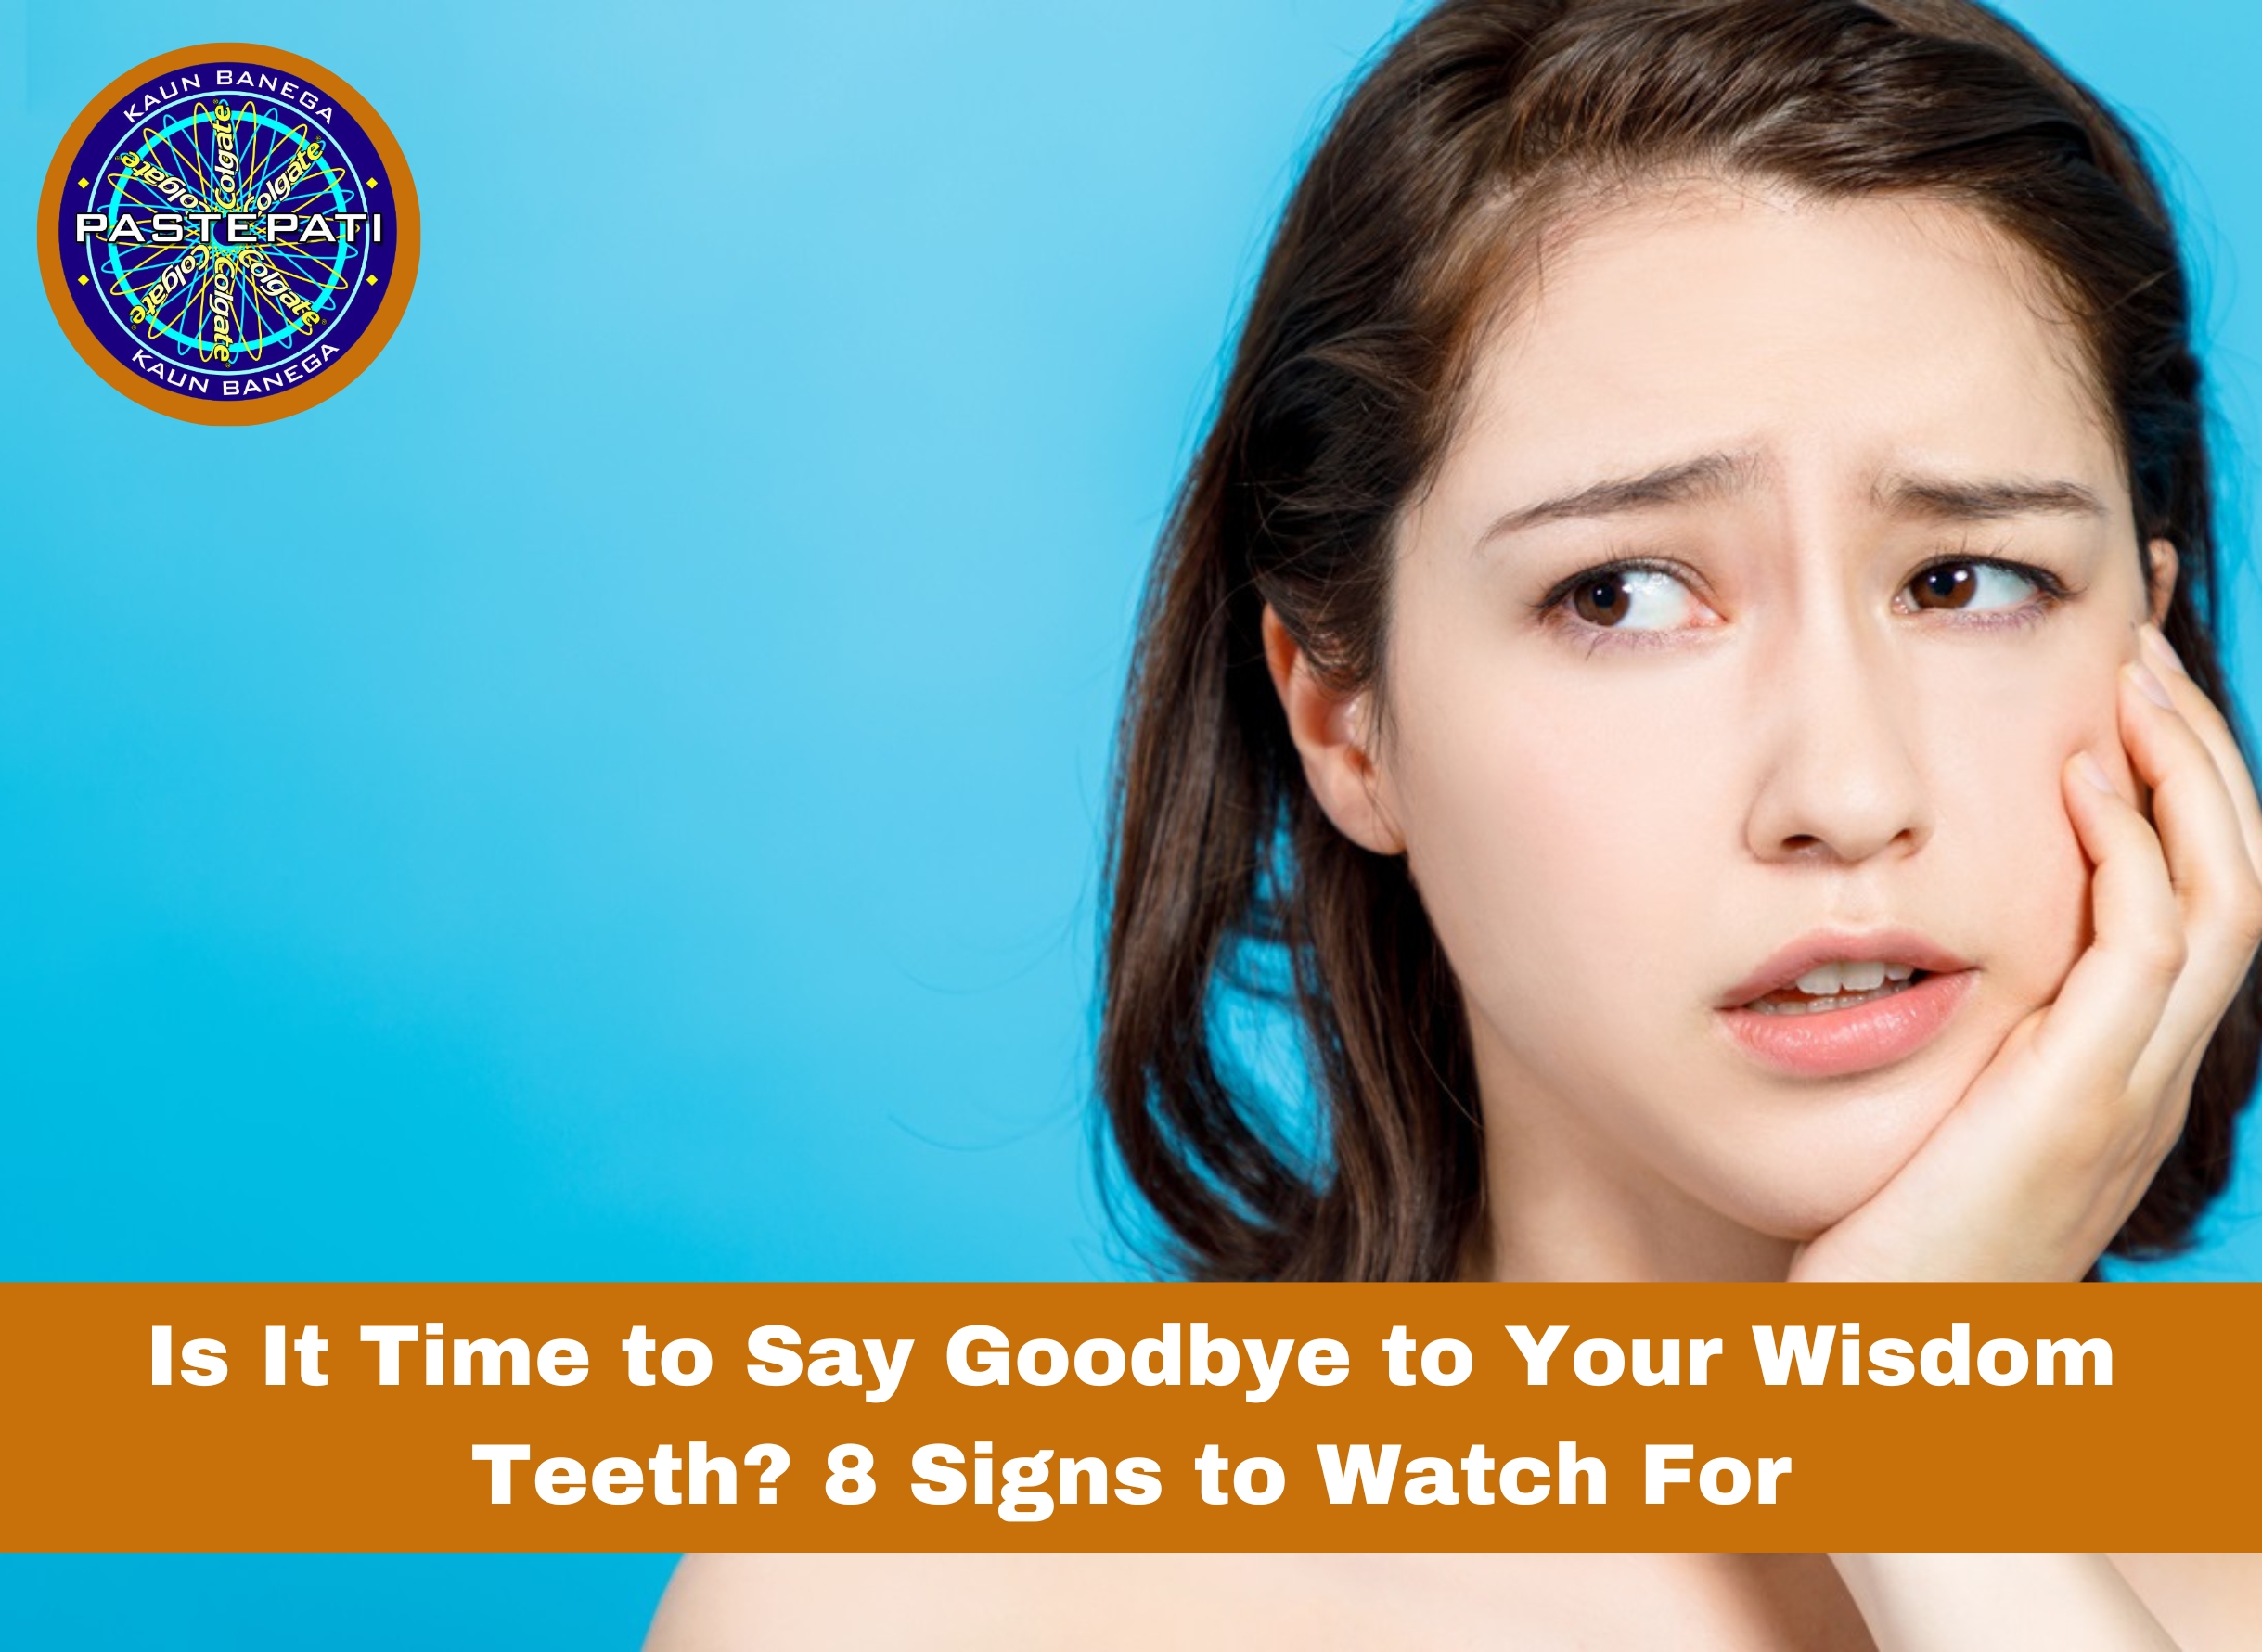 Is It Time to Say Goodbye to Your Wisdom Teeth? 8 Signs to Watch For